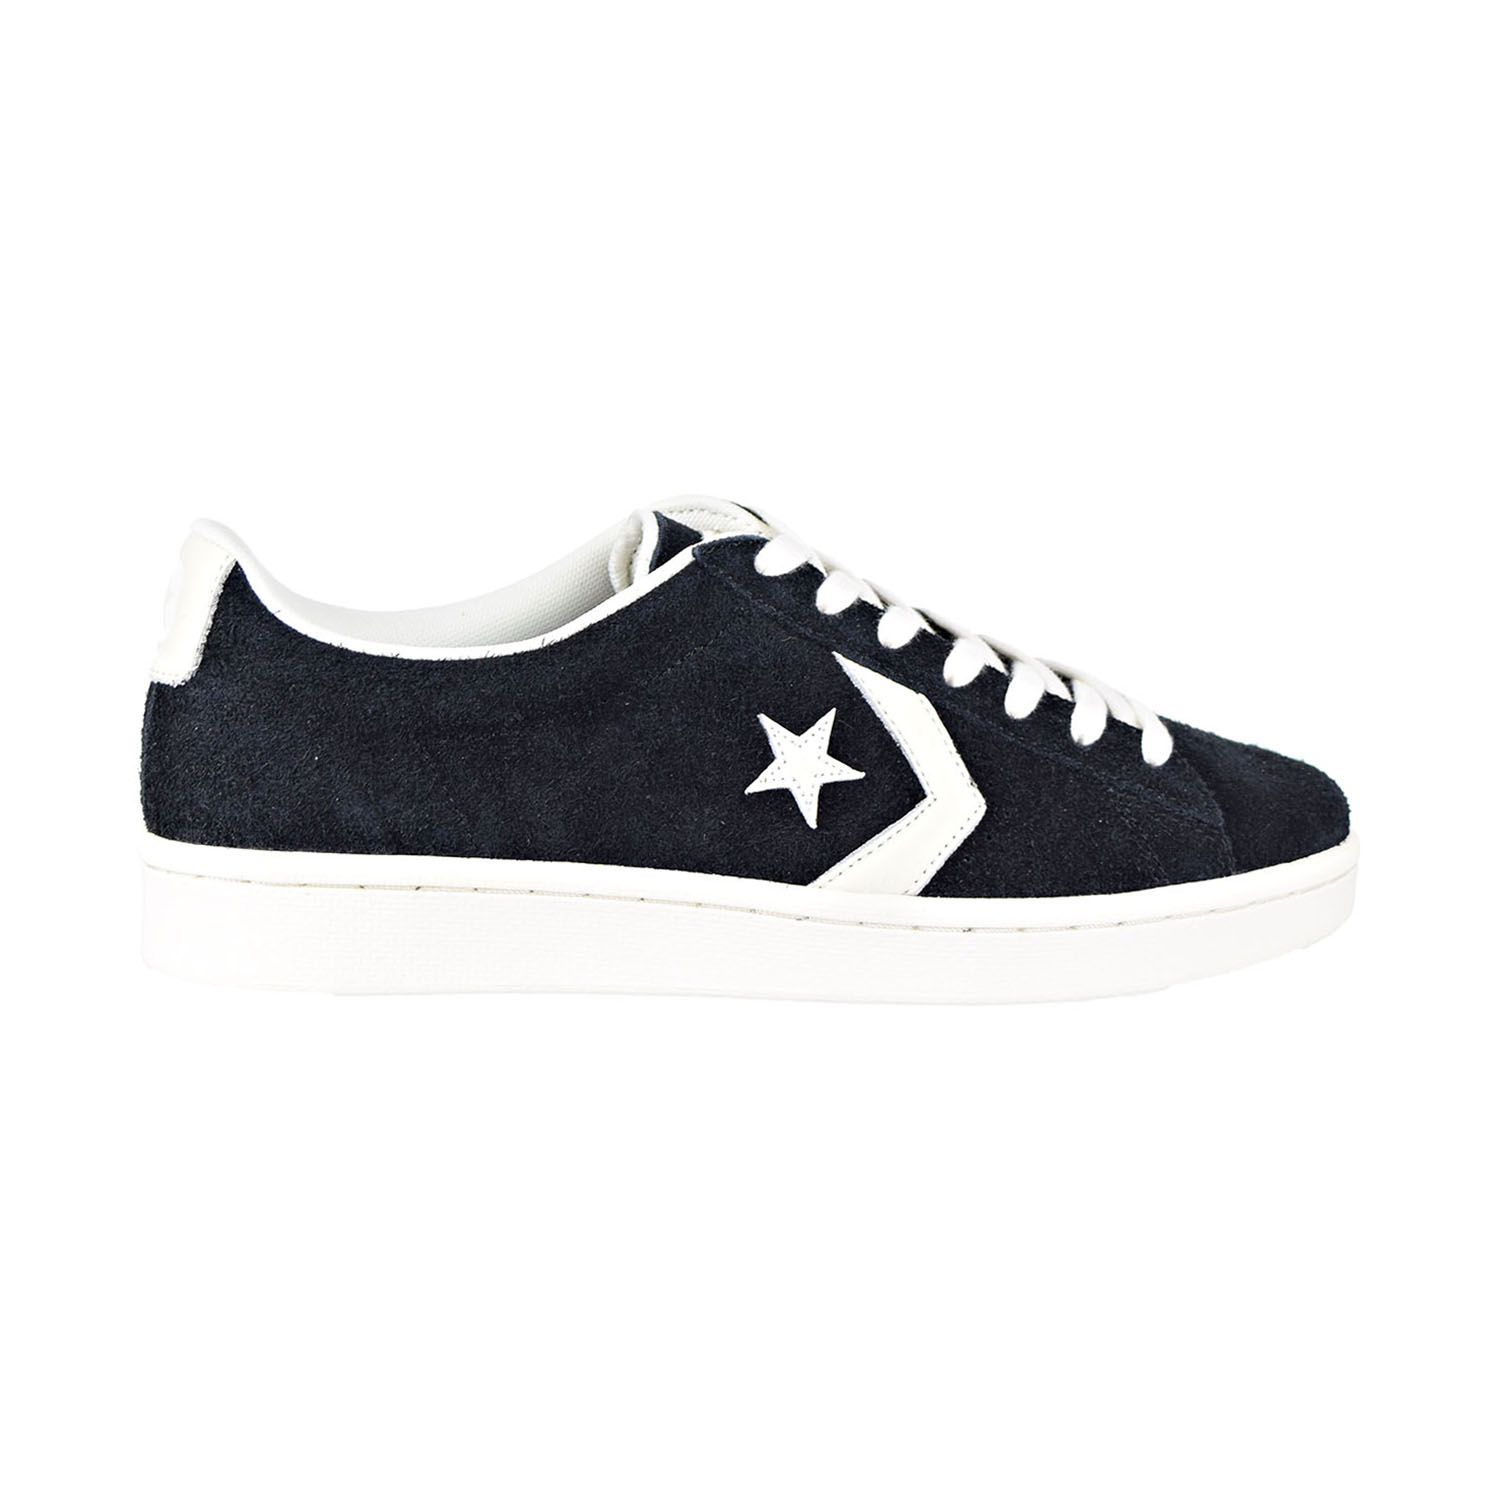 converse pro leather skate ox